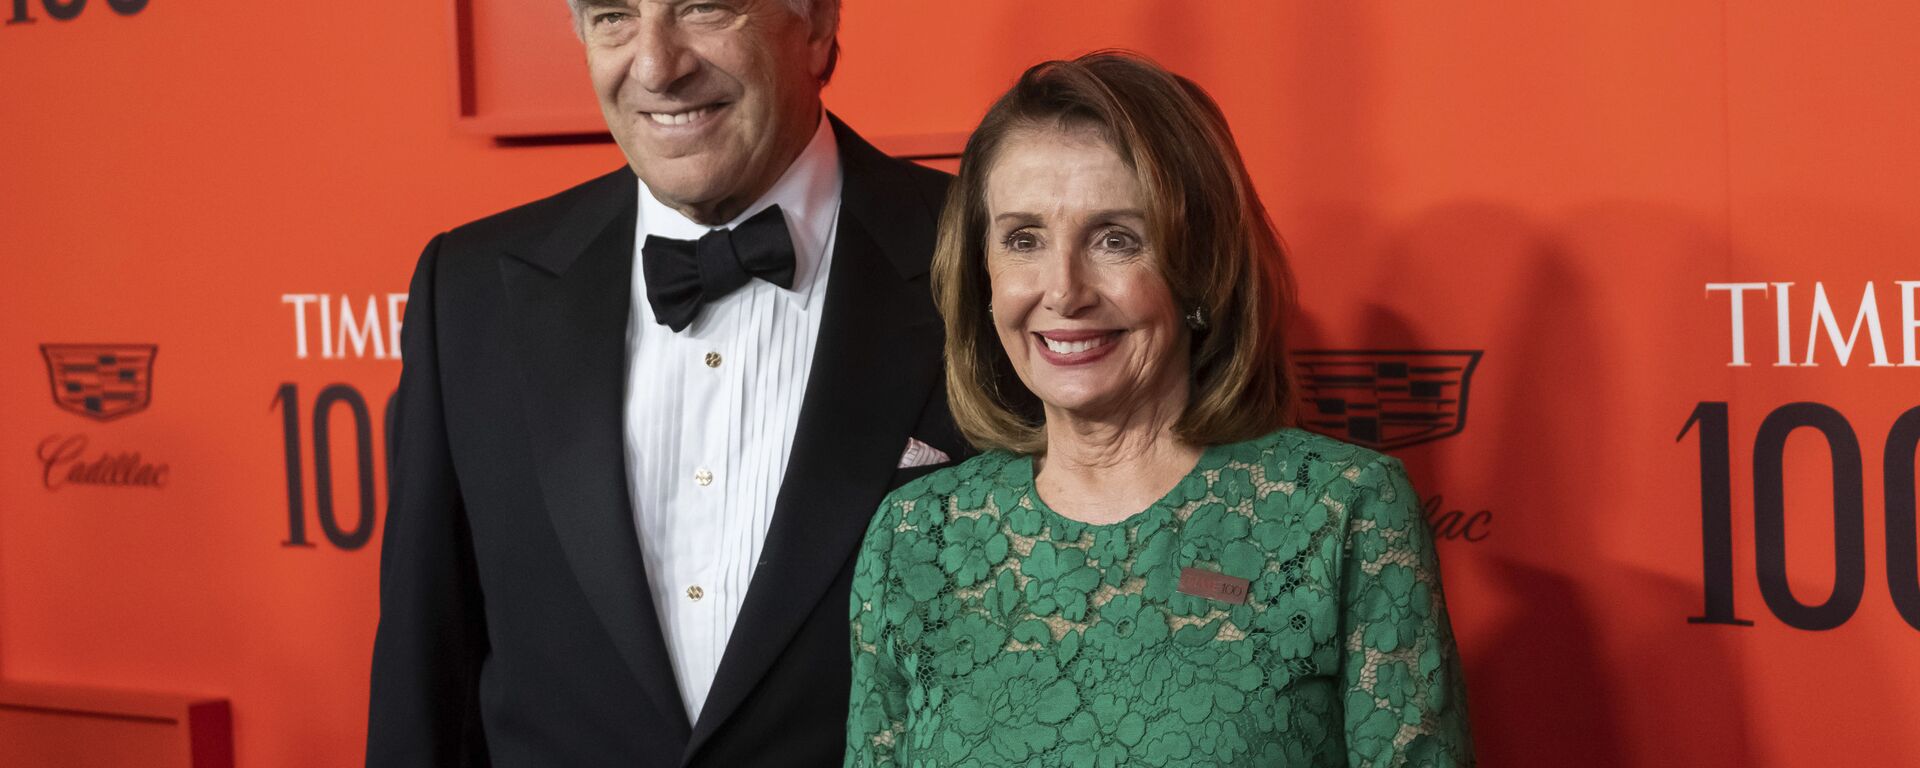 Paul Pelosi and Nancy Pelosi attend the 2019 Time 100 Gala, celebrating the 100 most influential people in the world, at Frederick P. Rose Hall, Jazz at Lincoln Center on Tuesday, April 23, 2019, in New York - Sputnik International, 1920, 01.11.2022